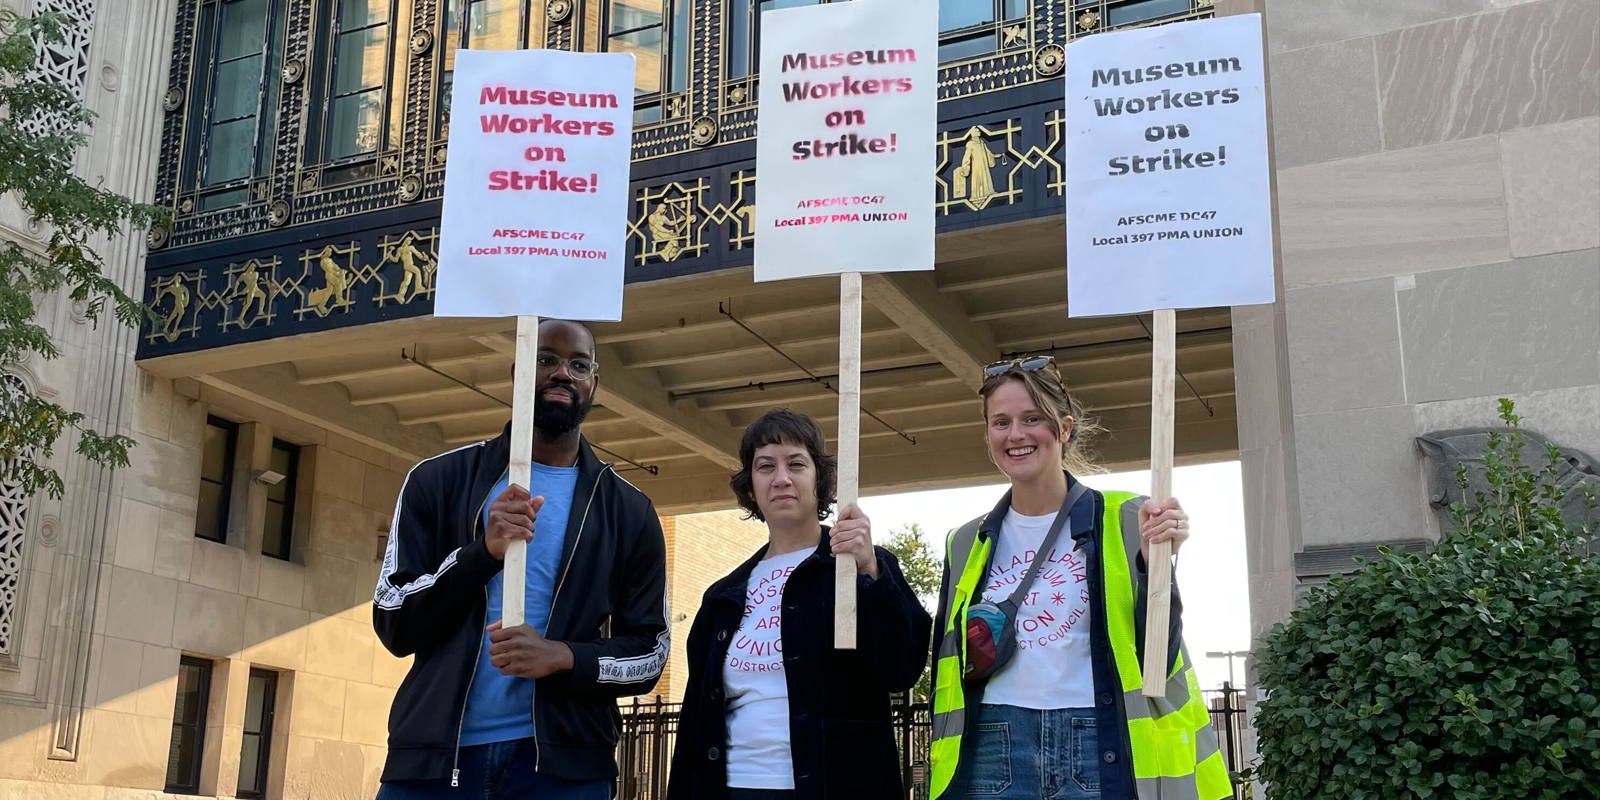 Philadelphia Museum of Art workers begin strike over unfair labor practices for better wages, benefits